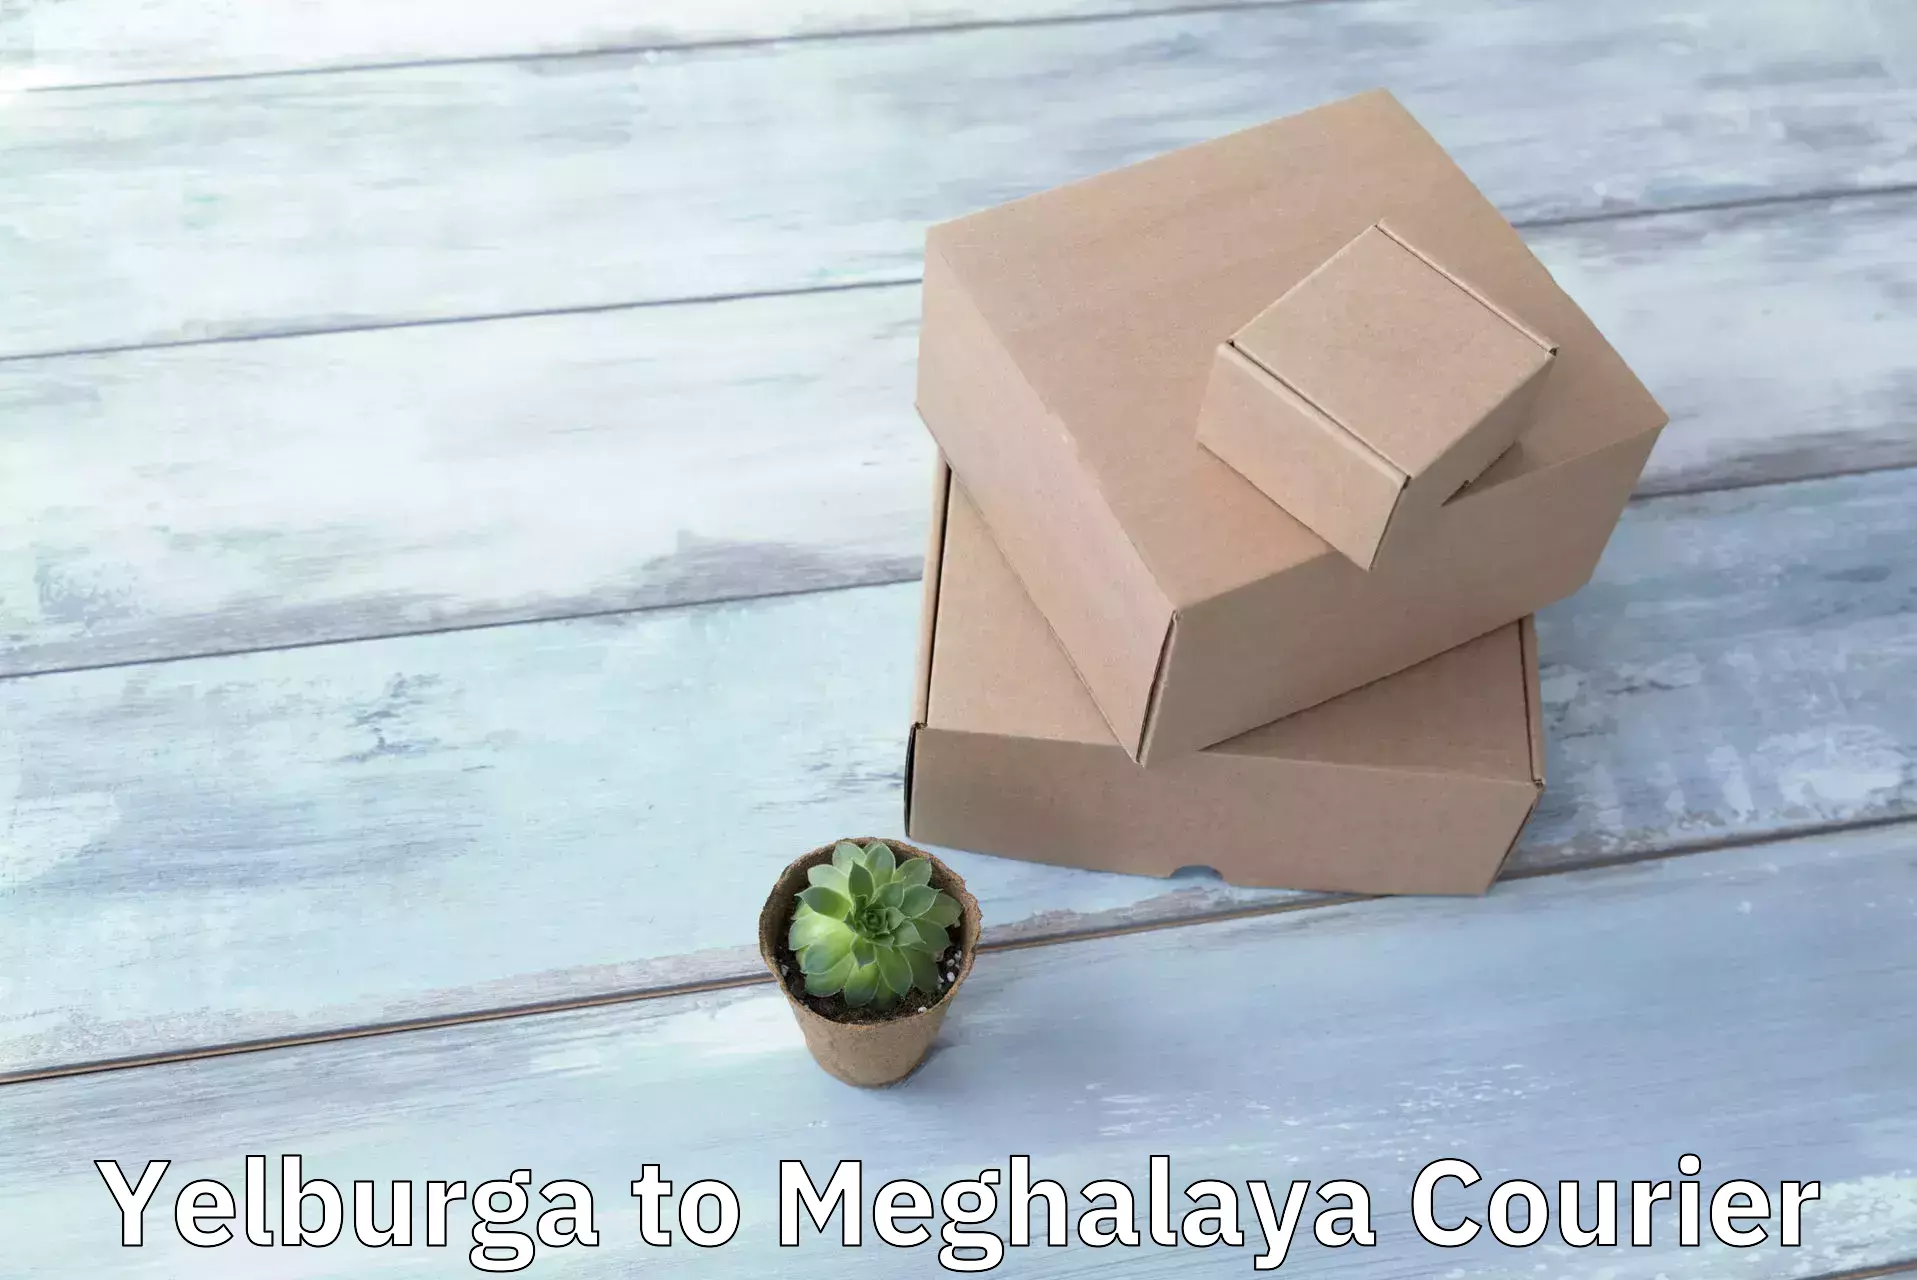 State-of-the-art courier technology in Yelburga to West Khasi Hills